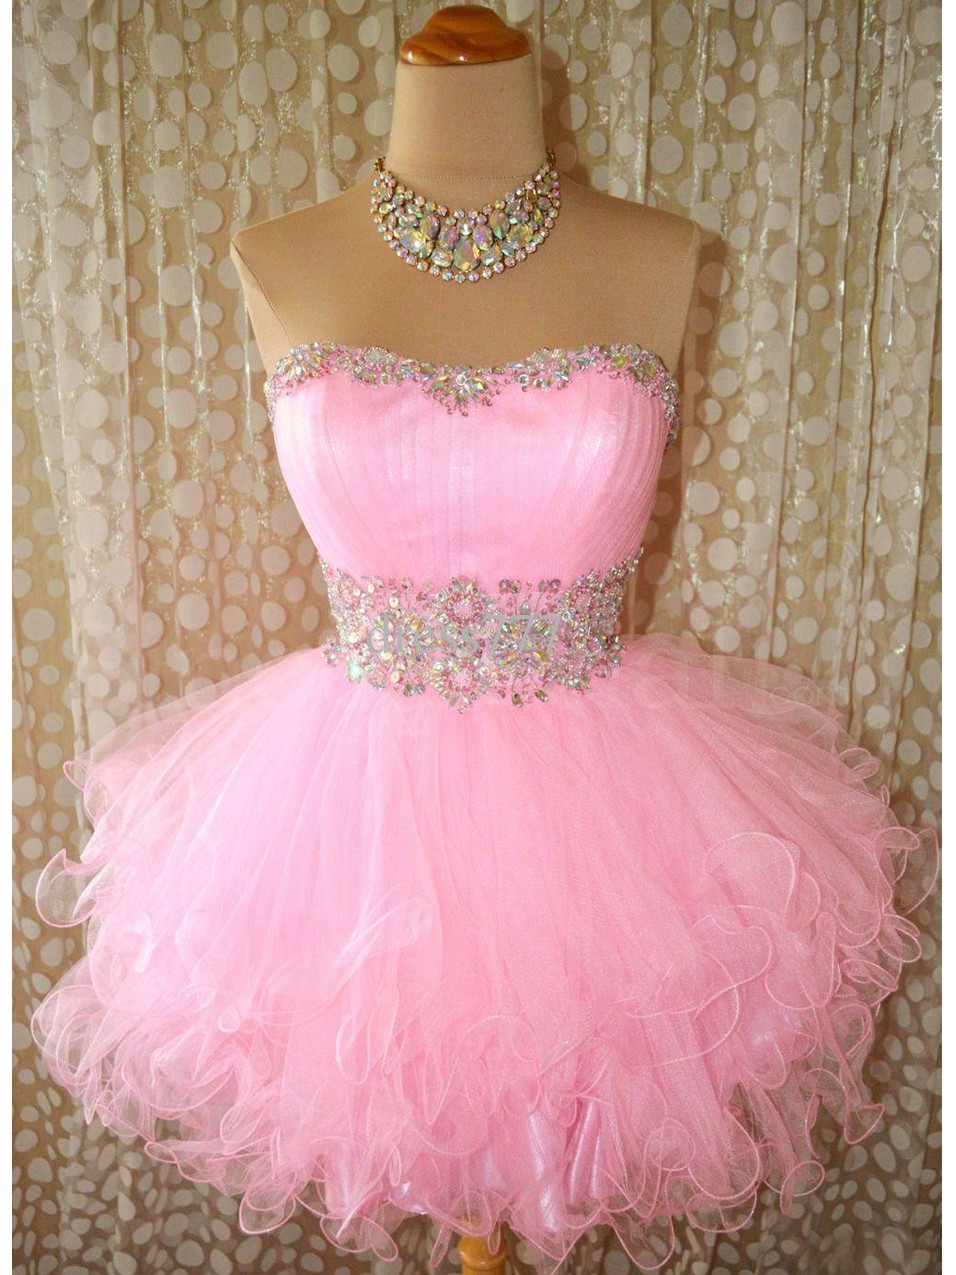 Ball Gown Sweetheart Beaded Tulle Short Pink Prom Dresses Gowns 2016, Formal Evening Dresses Gowns, Homecoming Graduation Cocktail Party